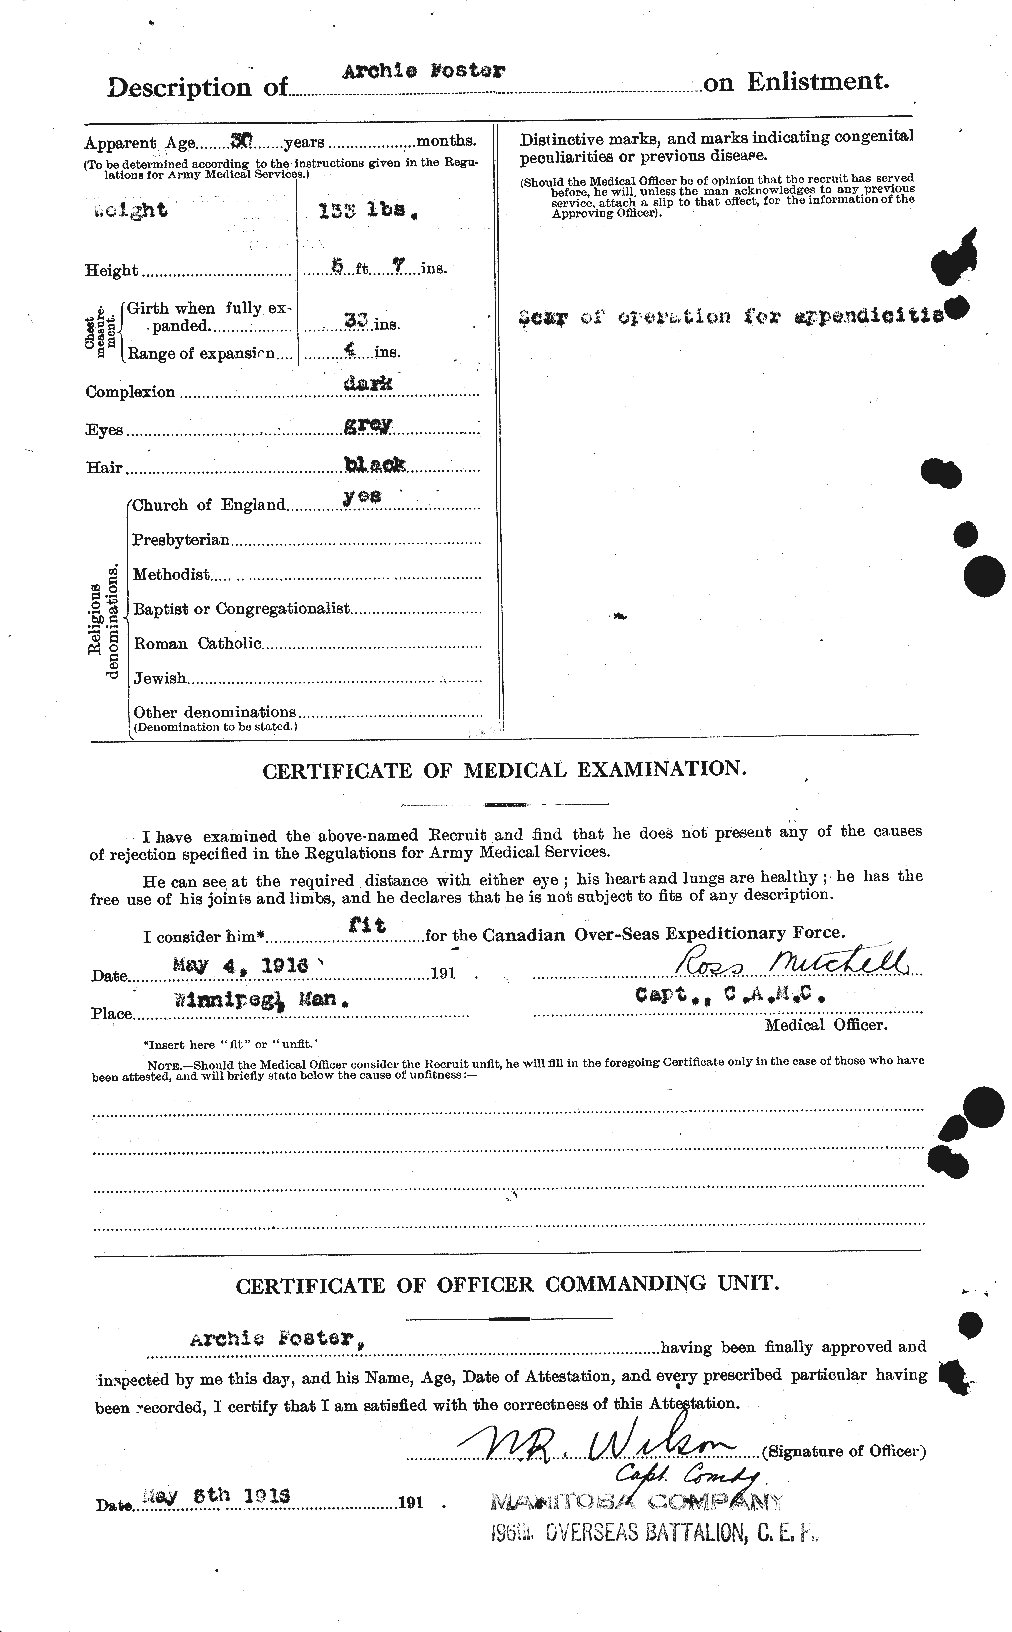 Personnel Records of the First World War - CEF 330461b